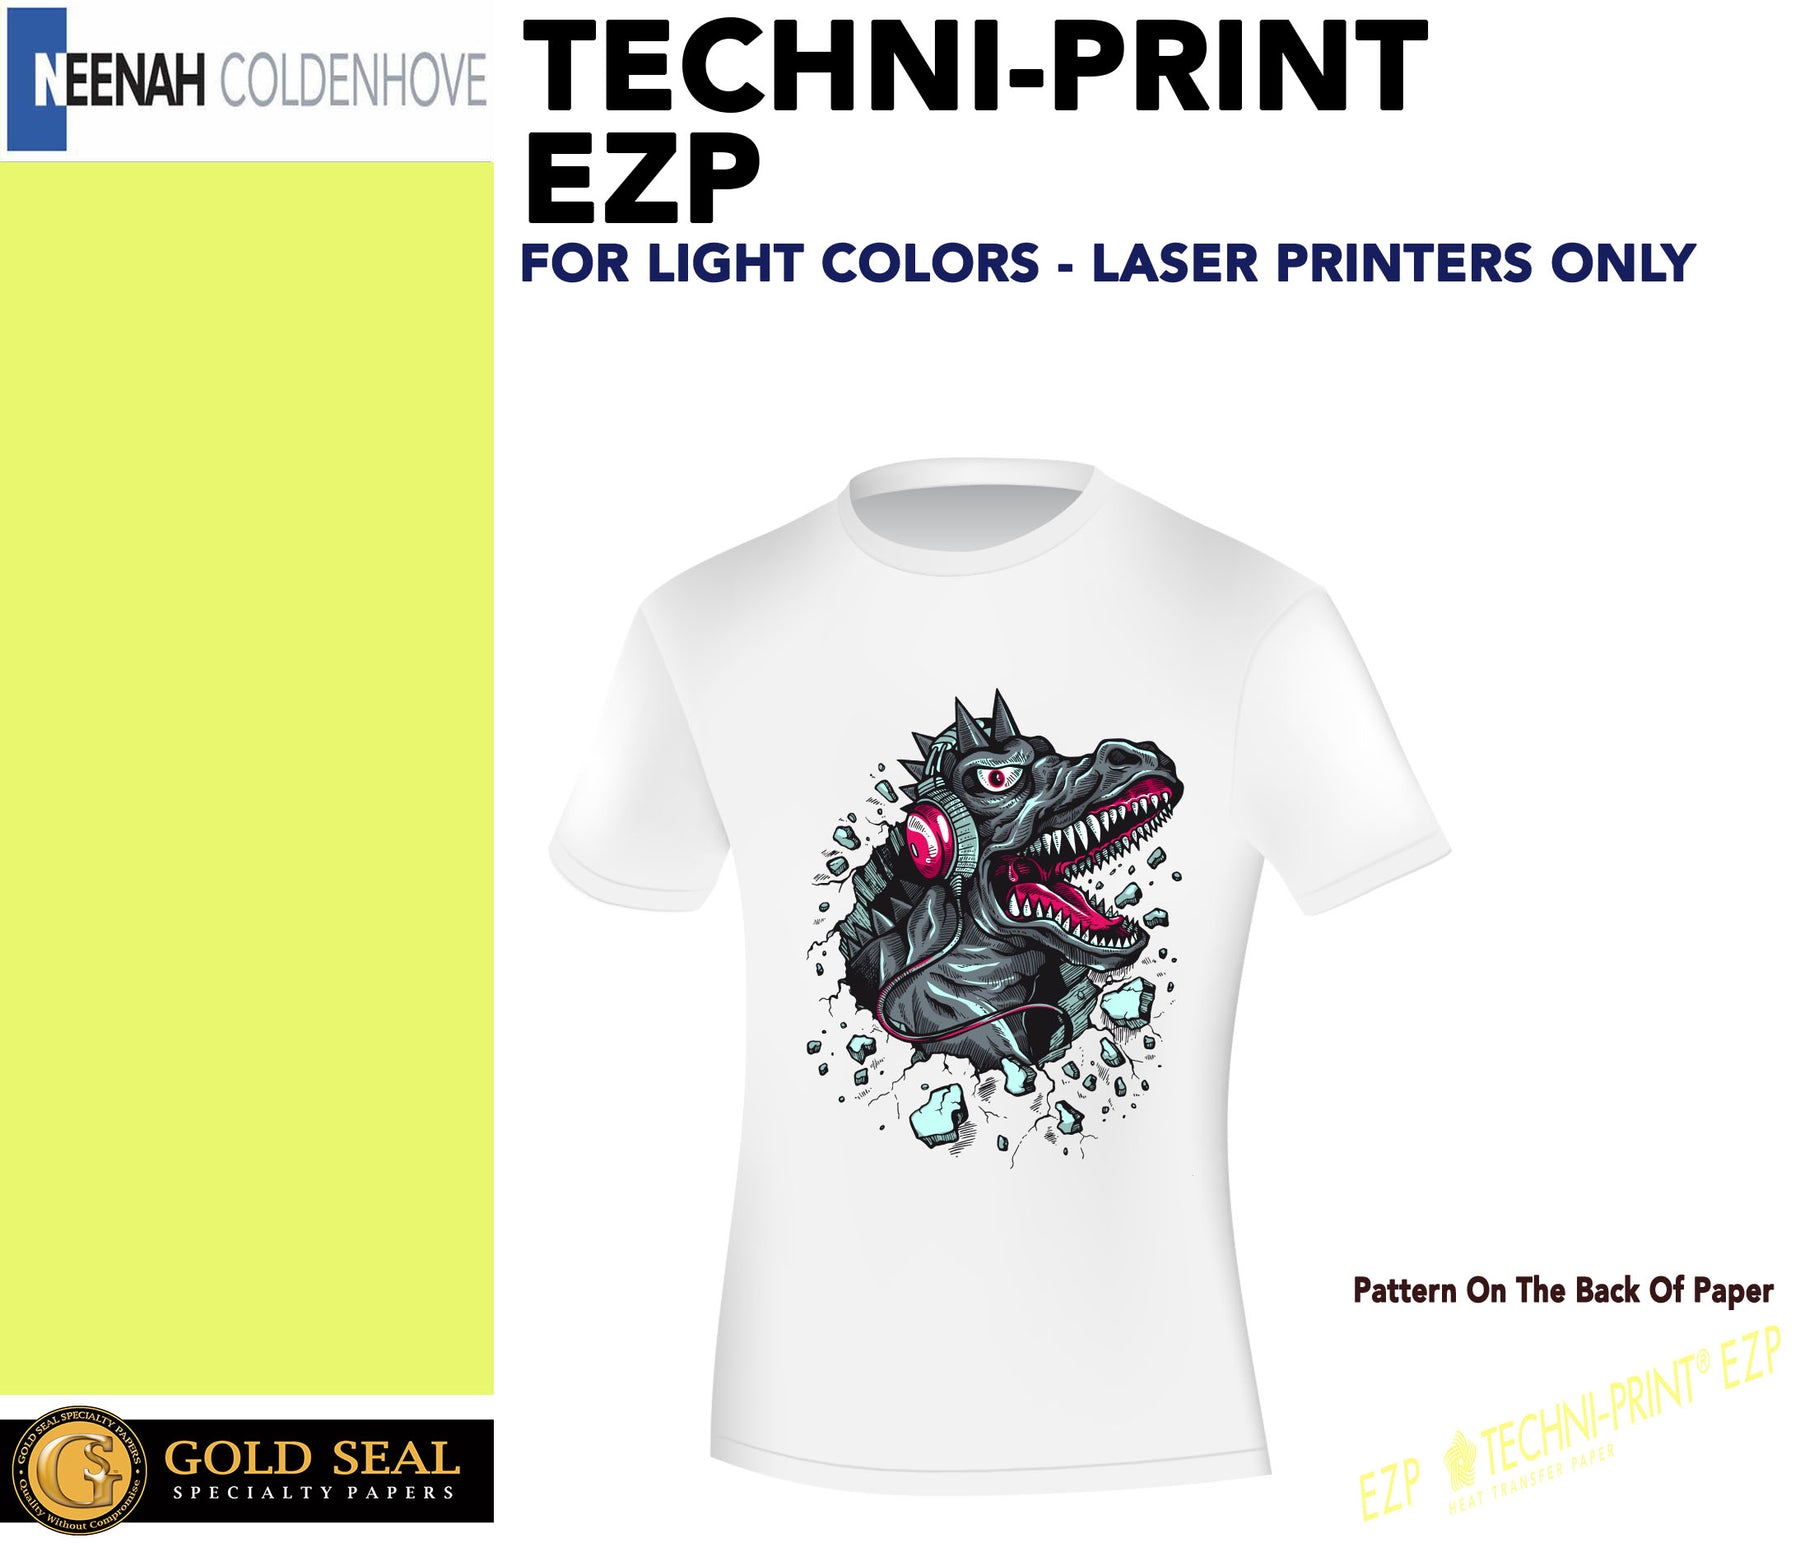 Heat Transfer Paper Sample Pack 5 Sheets of 3G Jet Opaque for Dark Colors &  5 Sheets of Jetpro for Light Colors 